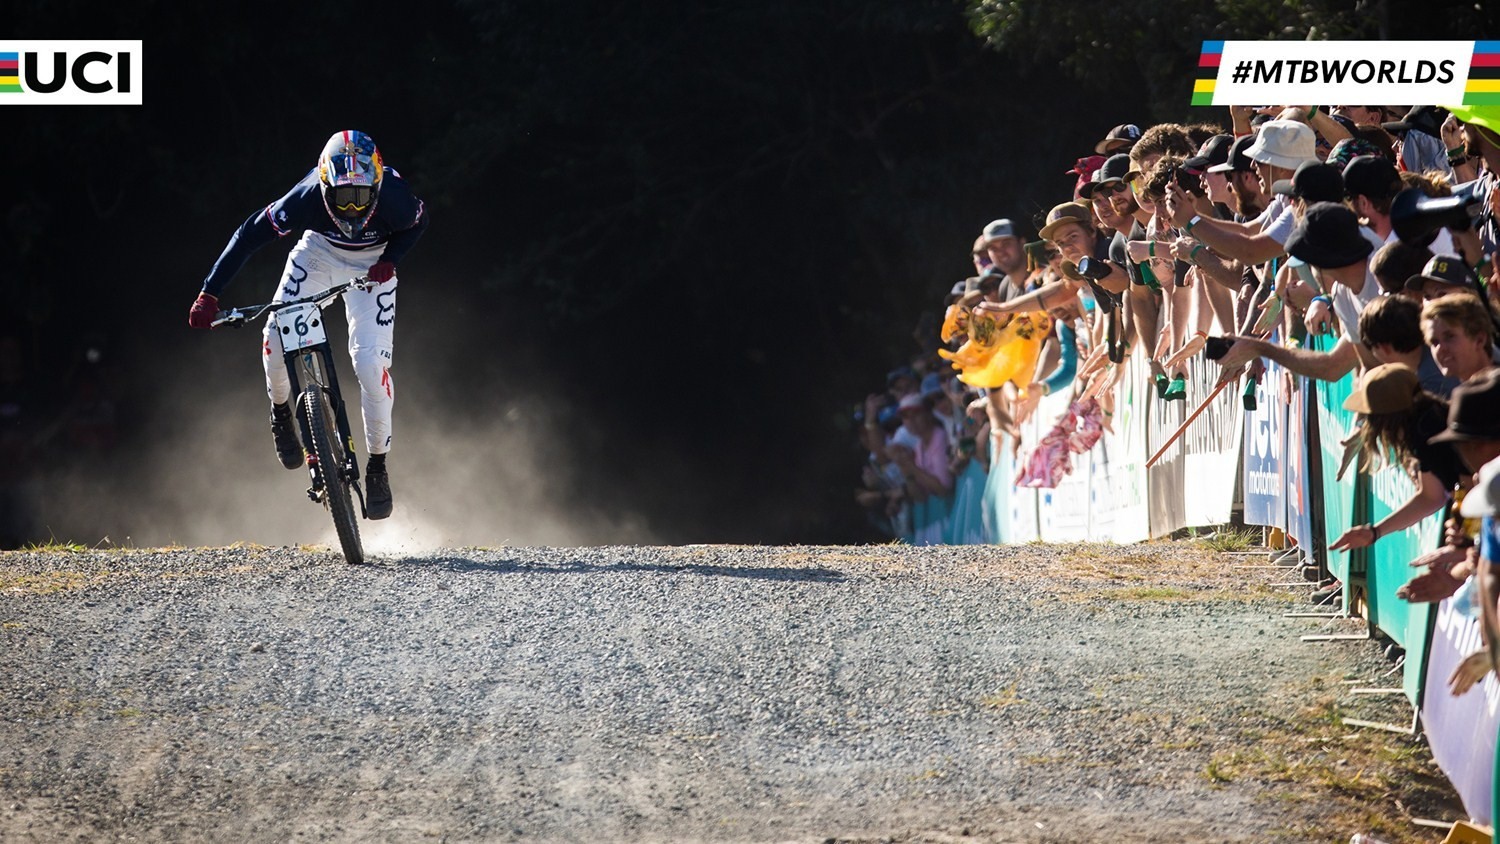 Loic Bruni secured his second senior downhill world title ©UCI